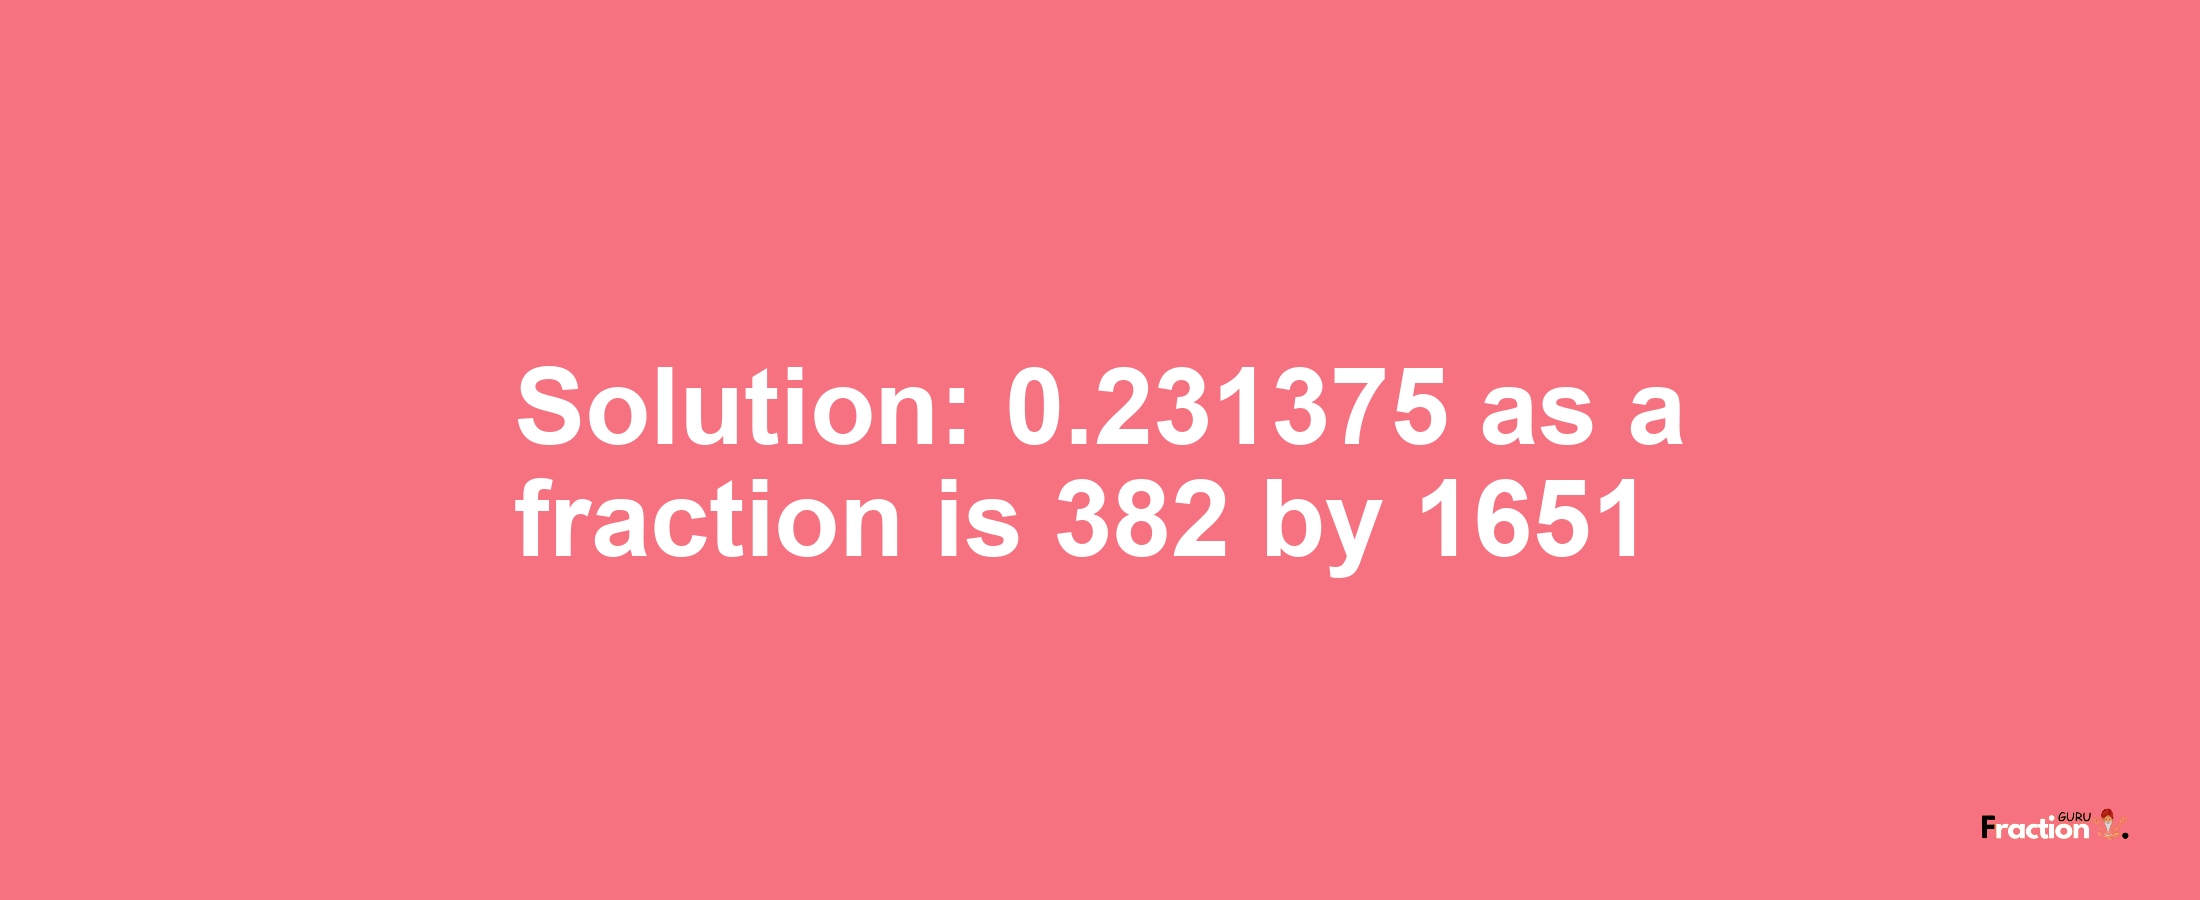 Solution:0.231375 as a fraction is 382/1651